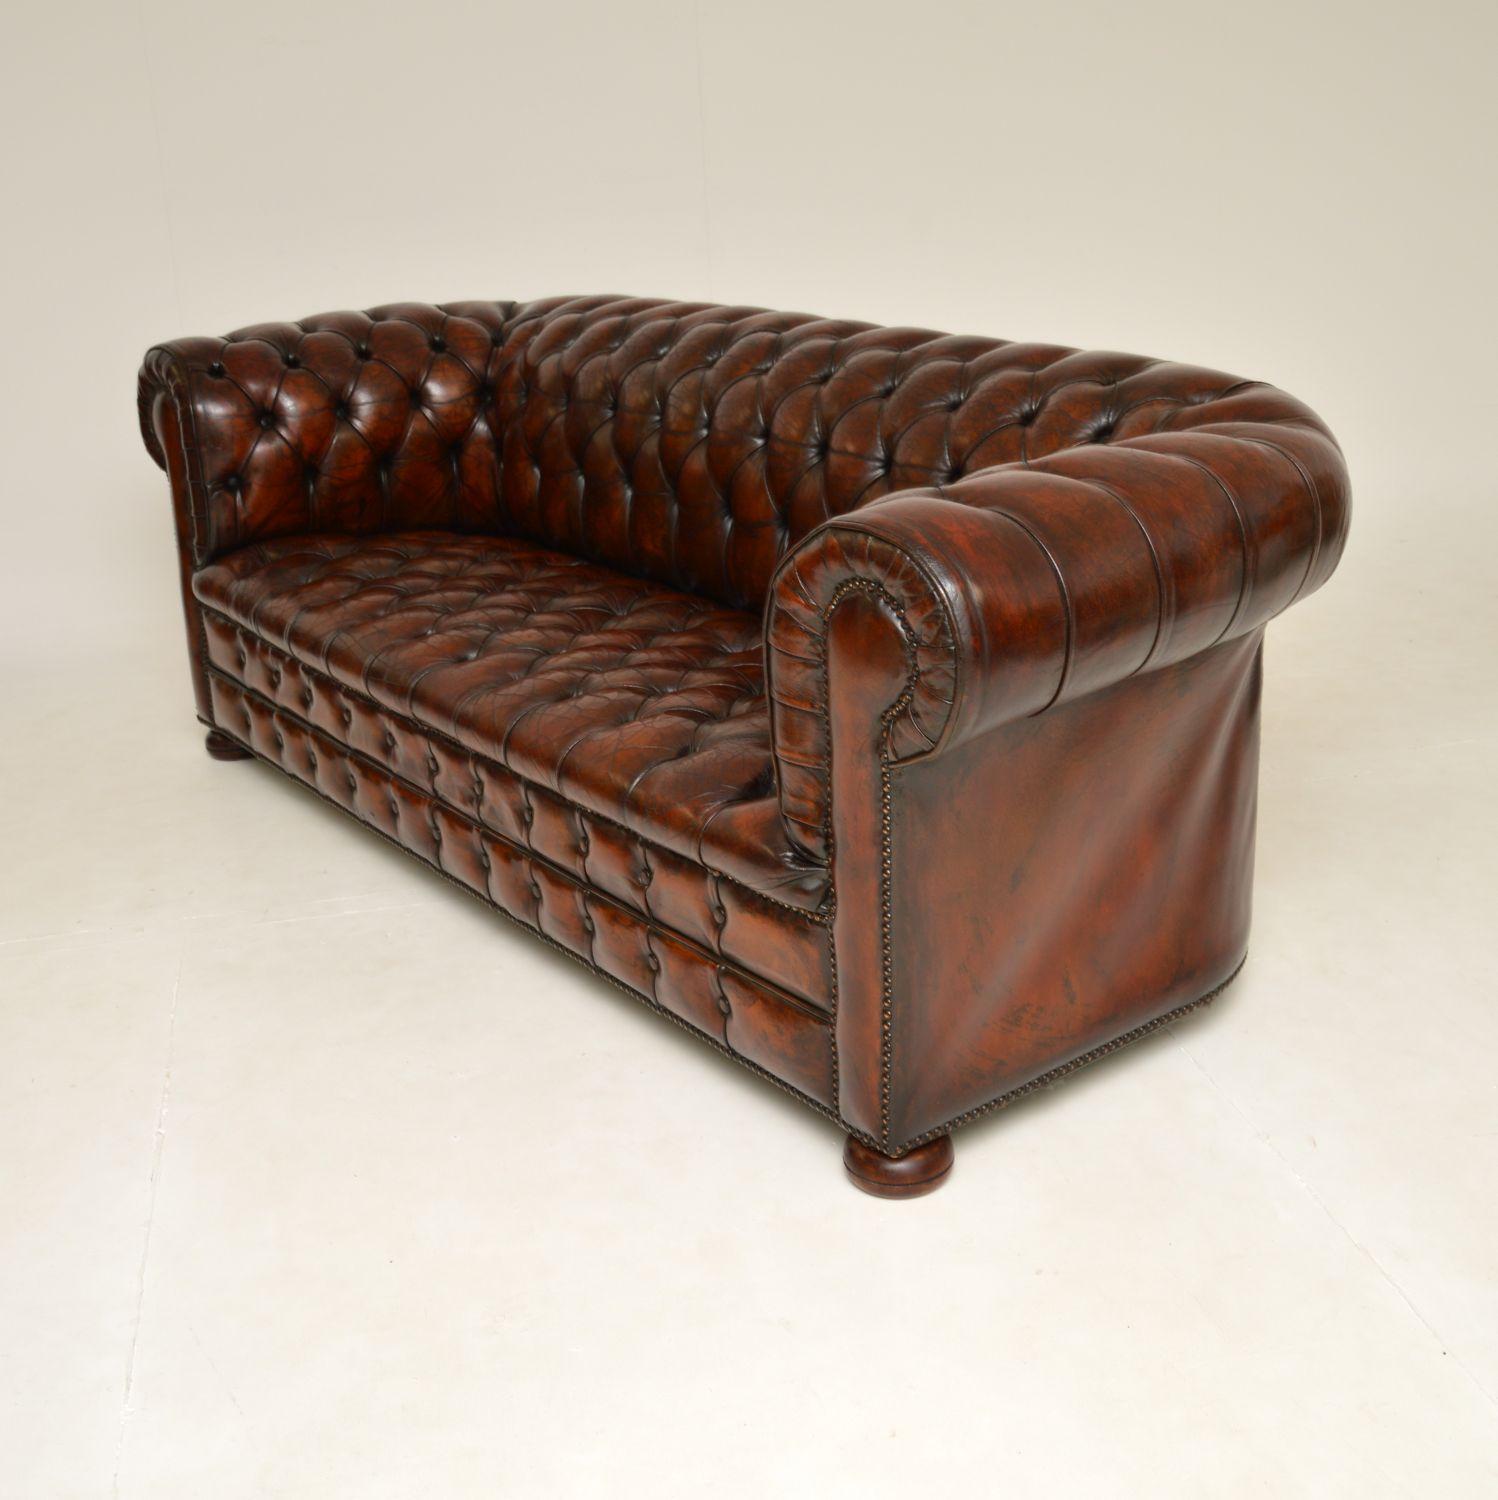 British Antique Deep Buttoned Leather Chesterfield Sofa